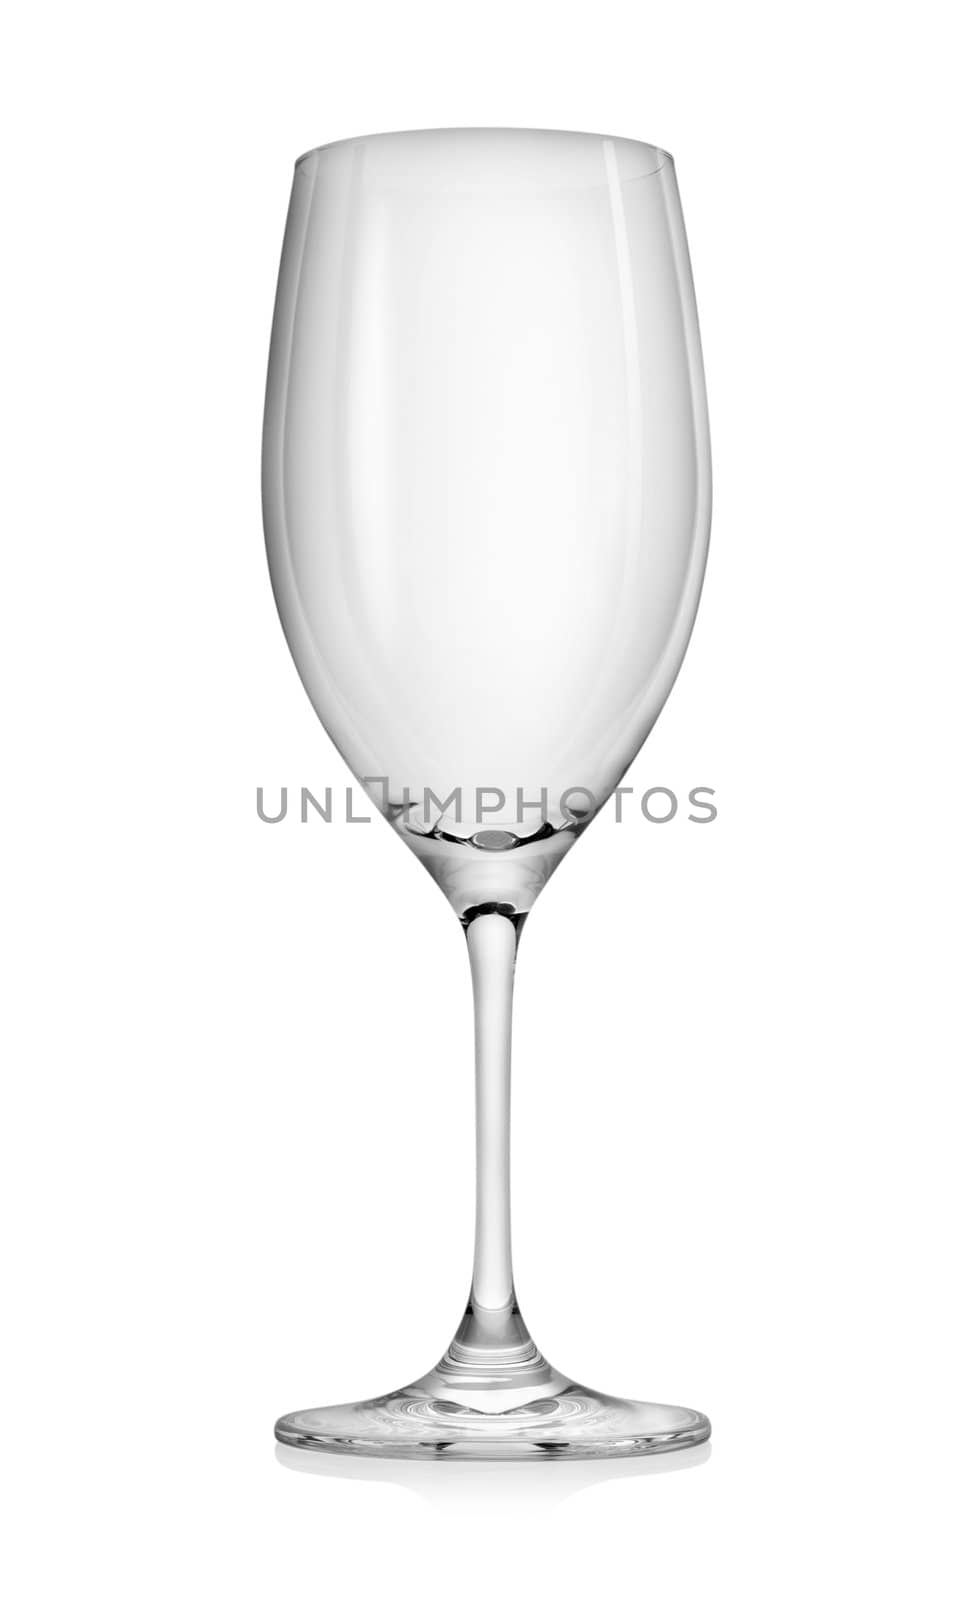 Empty wineglass by Givaga